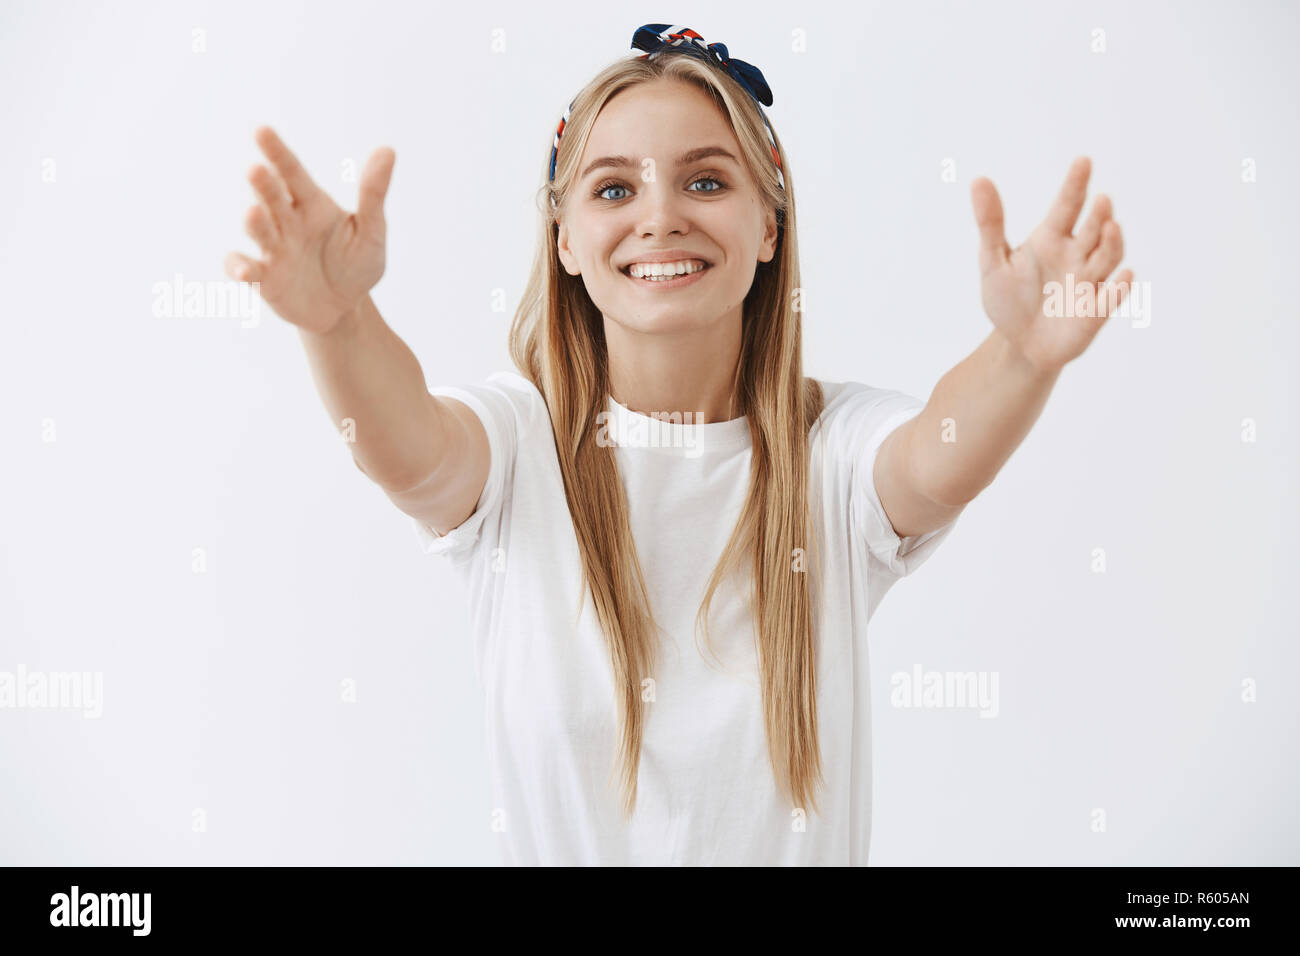 Come to me in my arms cutie. Portrait of tender attractive and joyful young woman with fair hair in headband pulling hands towards camera to give warm Stock Photo